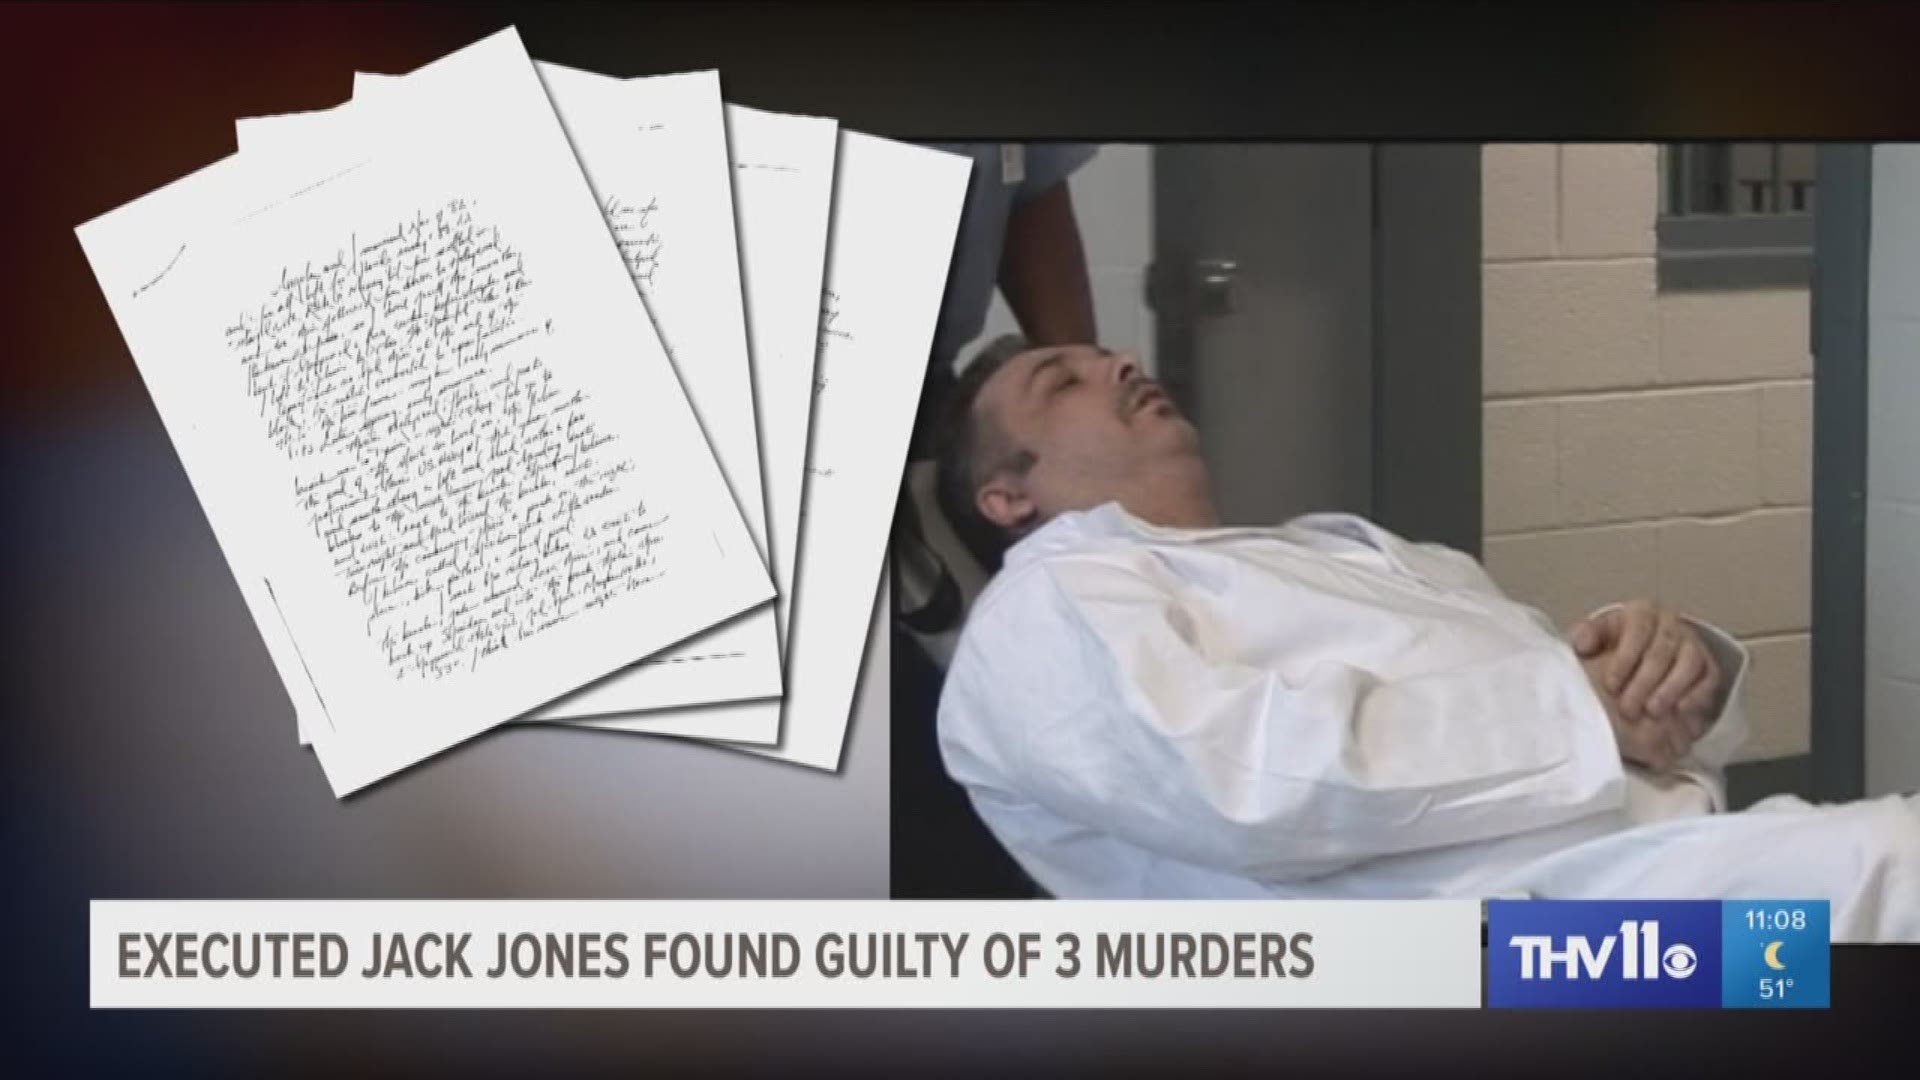 New information tonight about a man Arkansas executed two years ago Jack Jones.